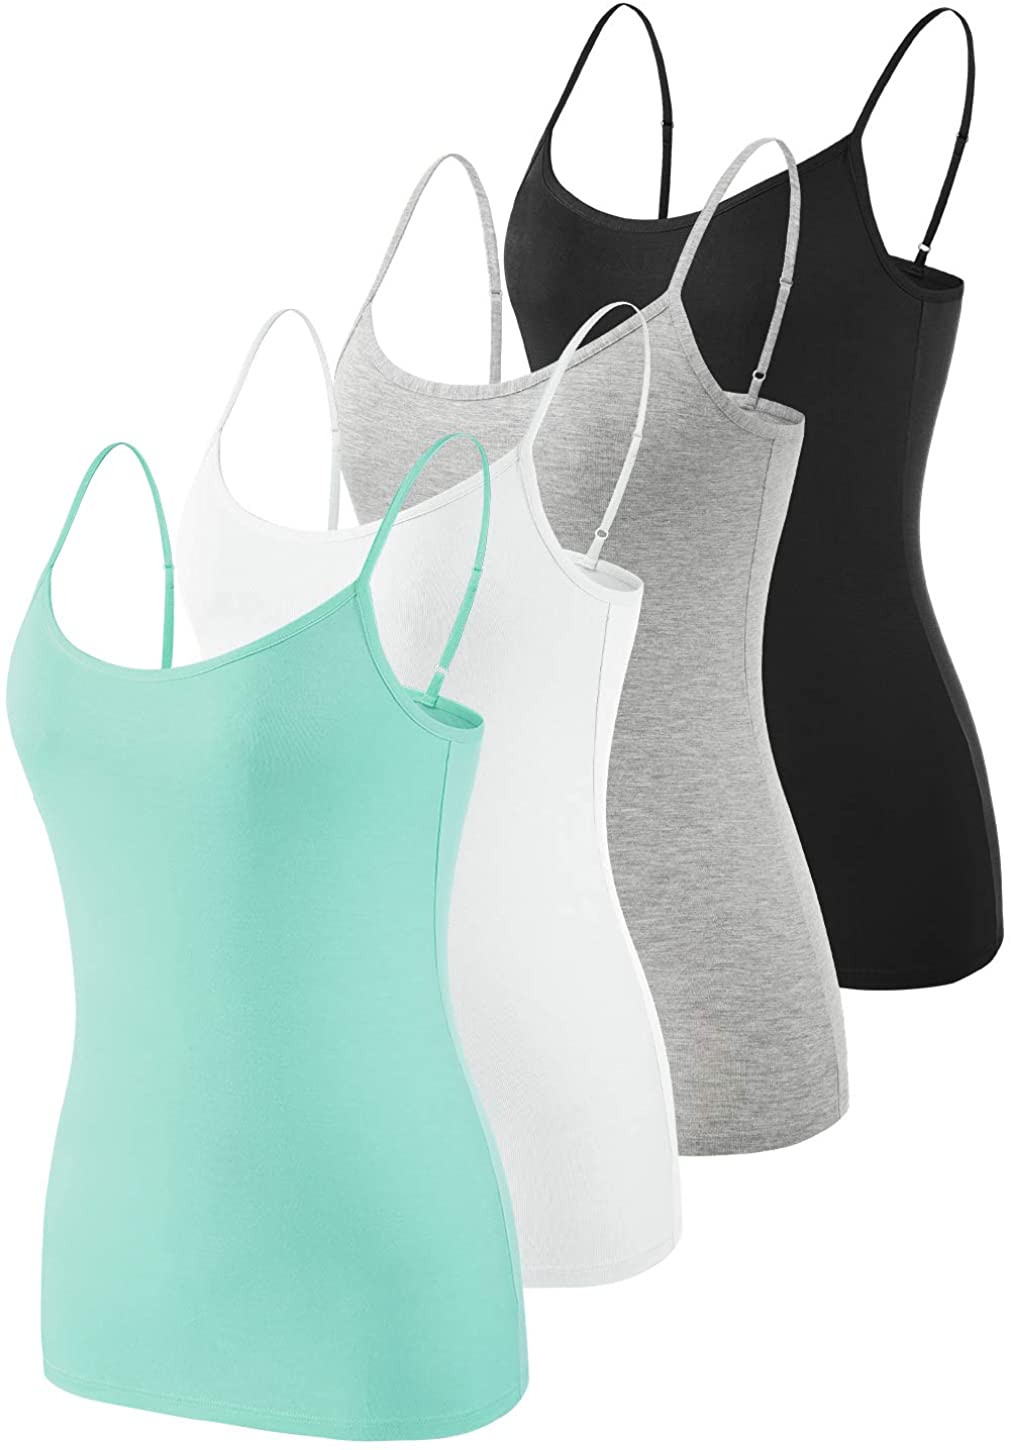 AMVELOP Adjustable Camisole for Women Spaghetti Strap Tank Top